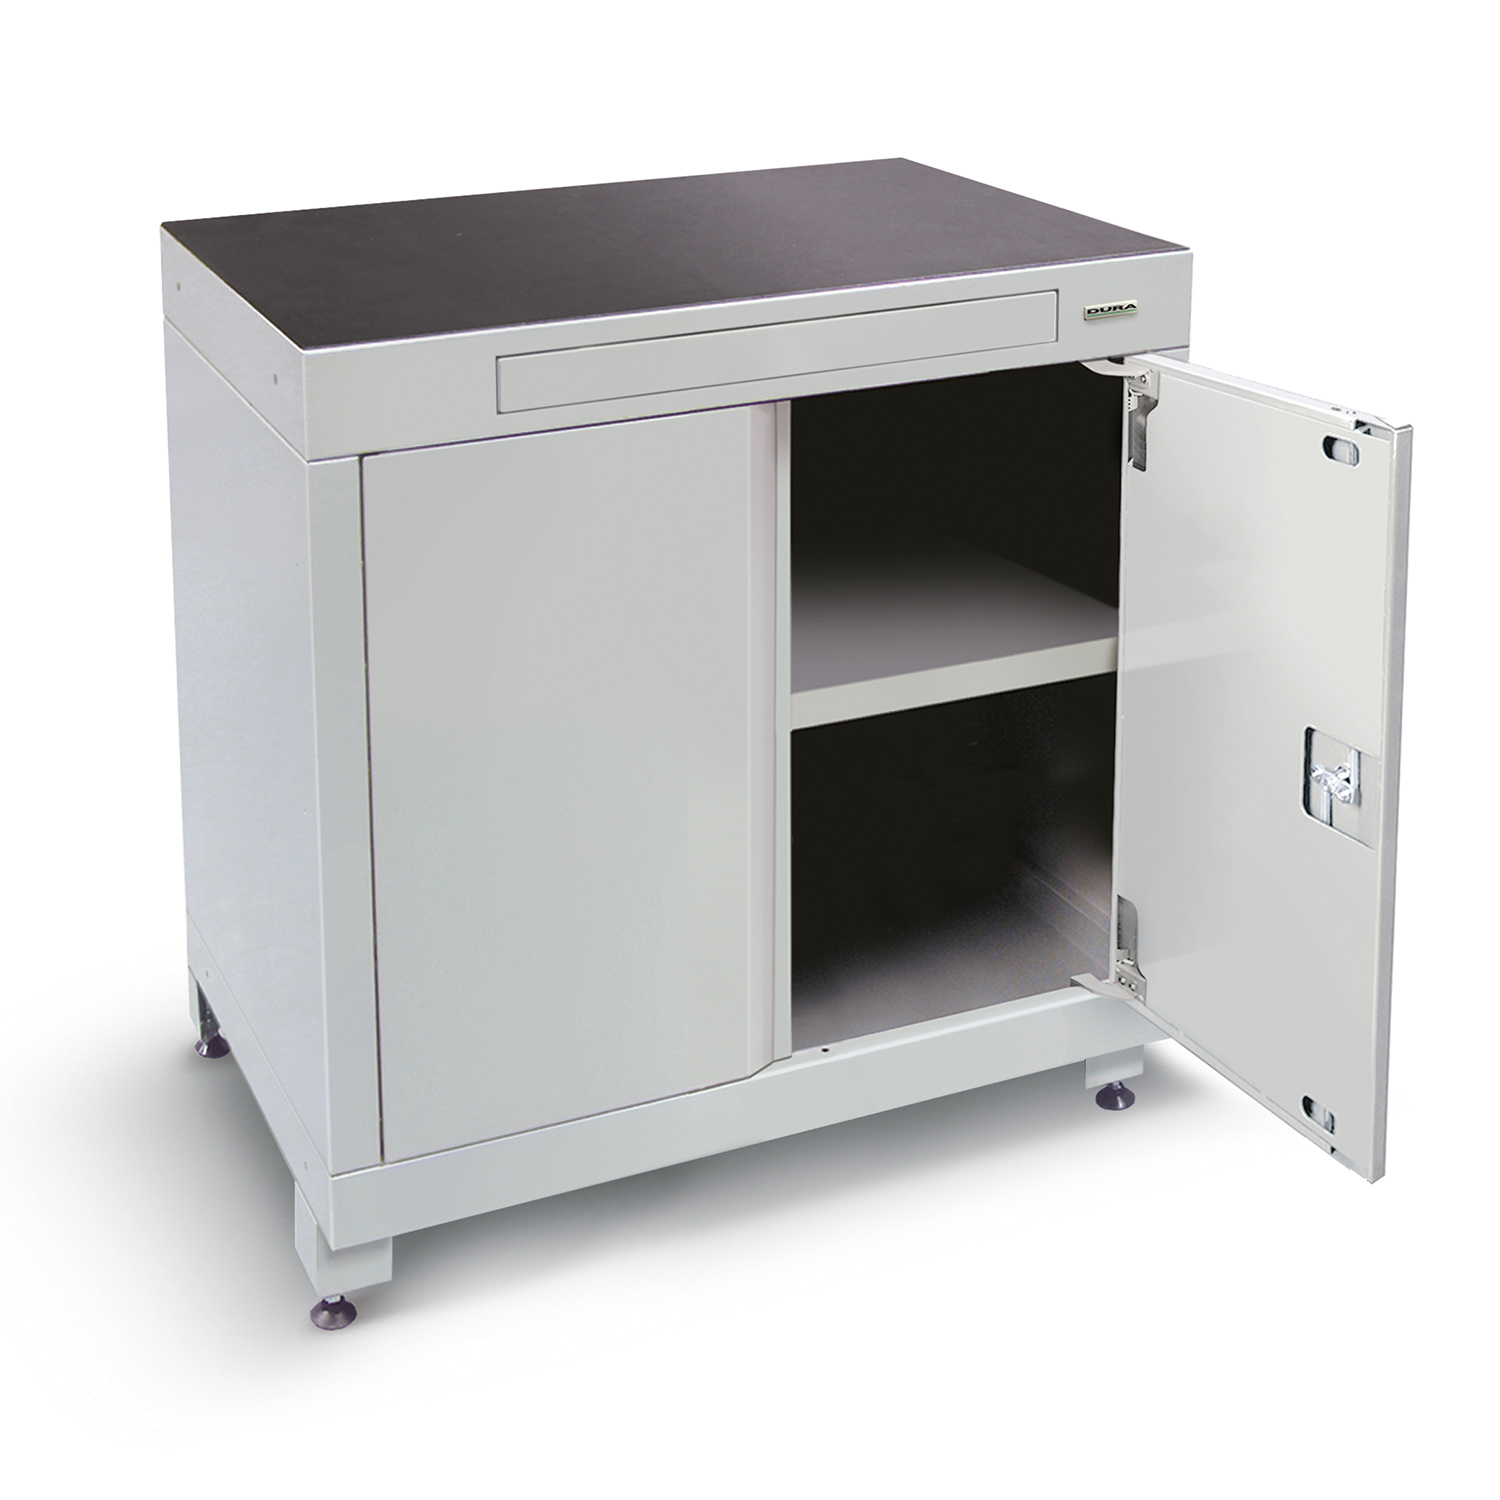 900mm wide base cabinet with drawer (double hinged doors/feet)